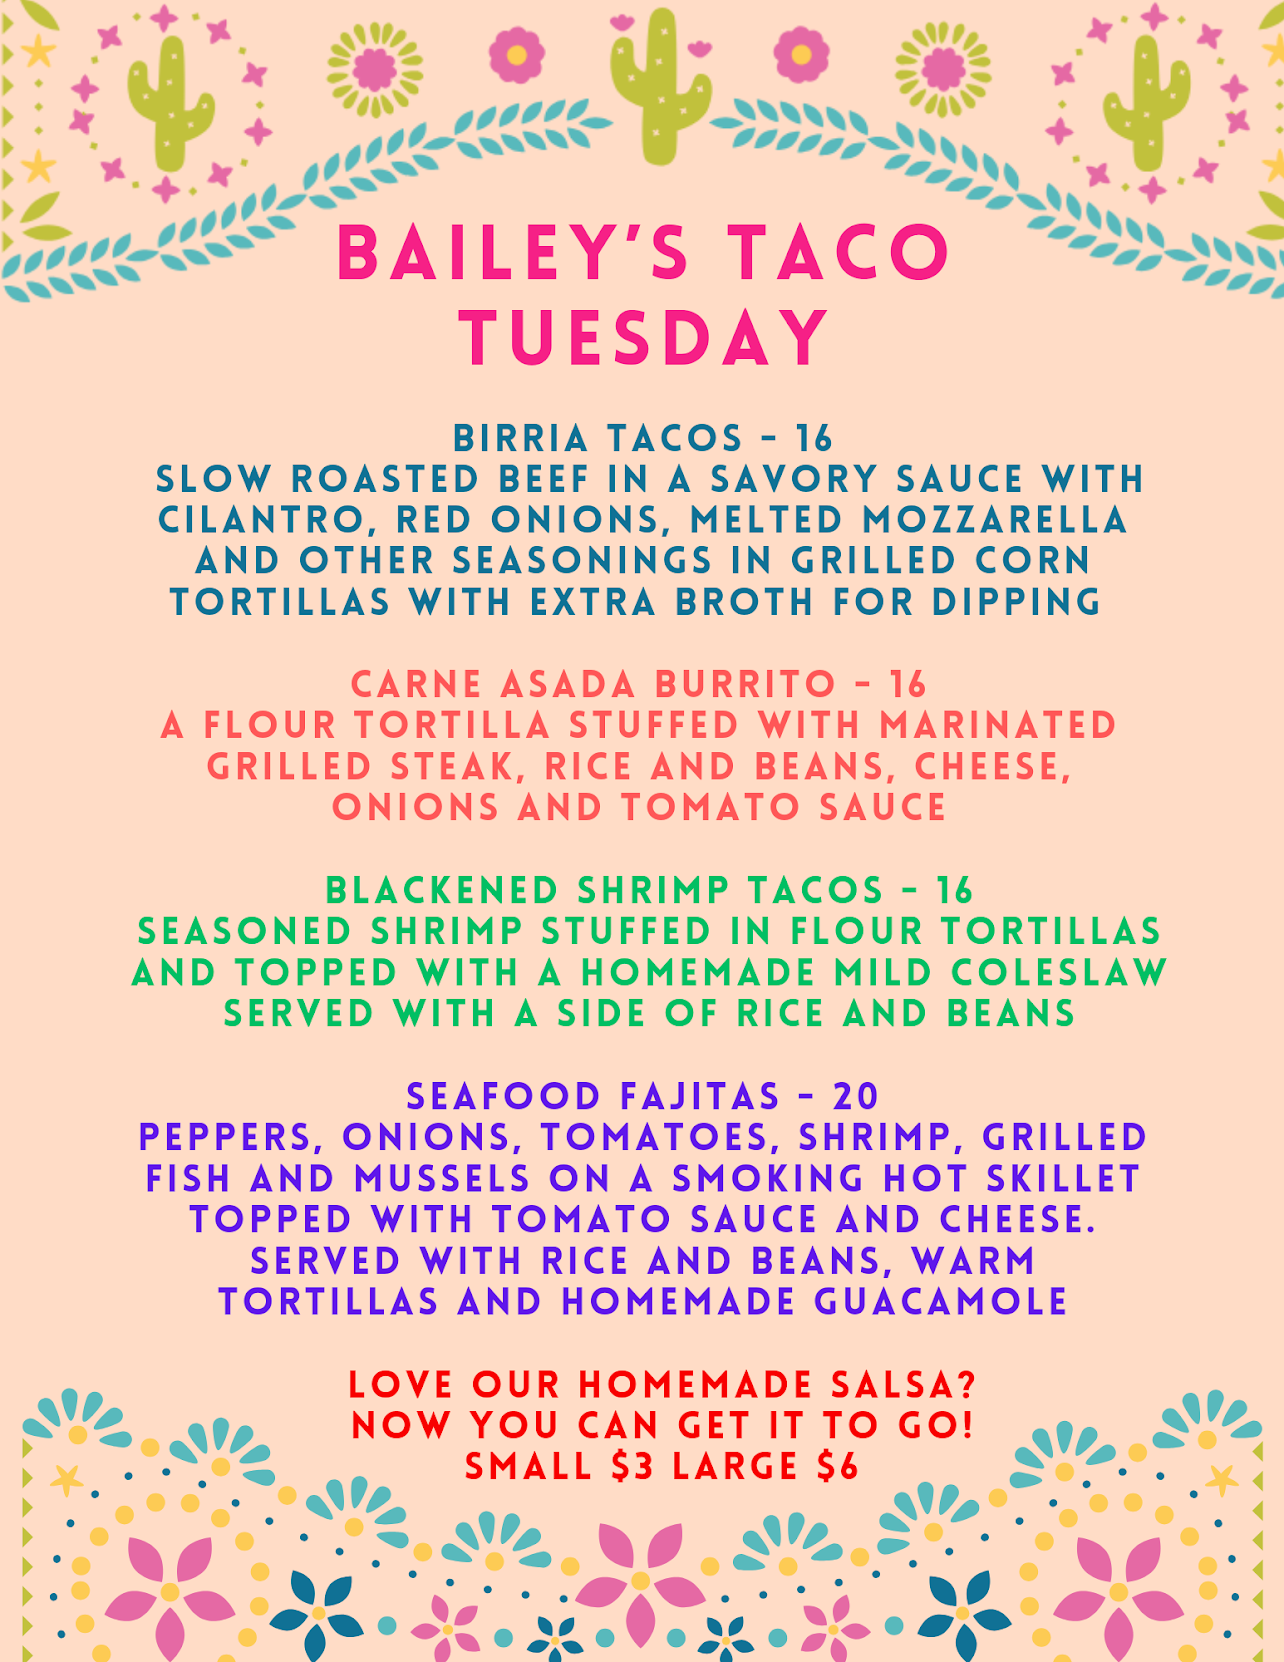 A colorful menu titled "Bailey's Taco Tuesday" featuring items like Birria Tacos, Carne Asada Burrito, Blackened Shrimp Tacos, and Seafood Fajitas along with salsa options in small and large sizes.